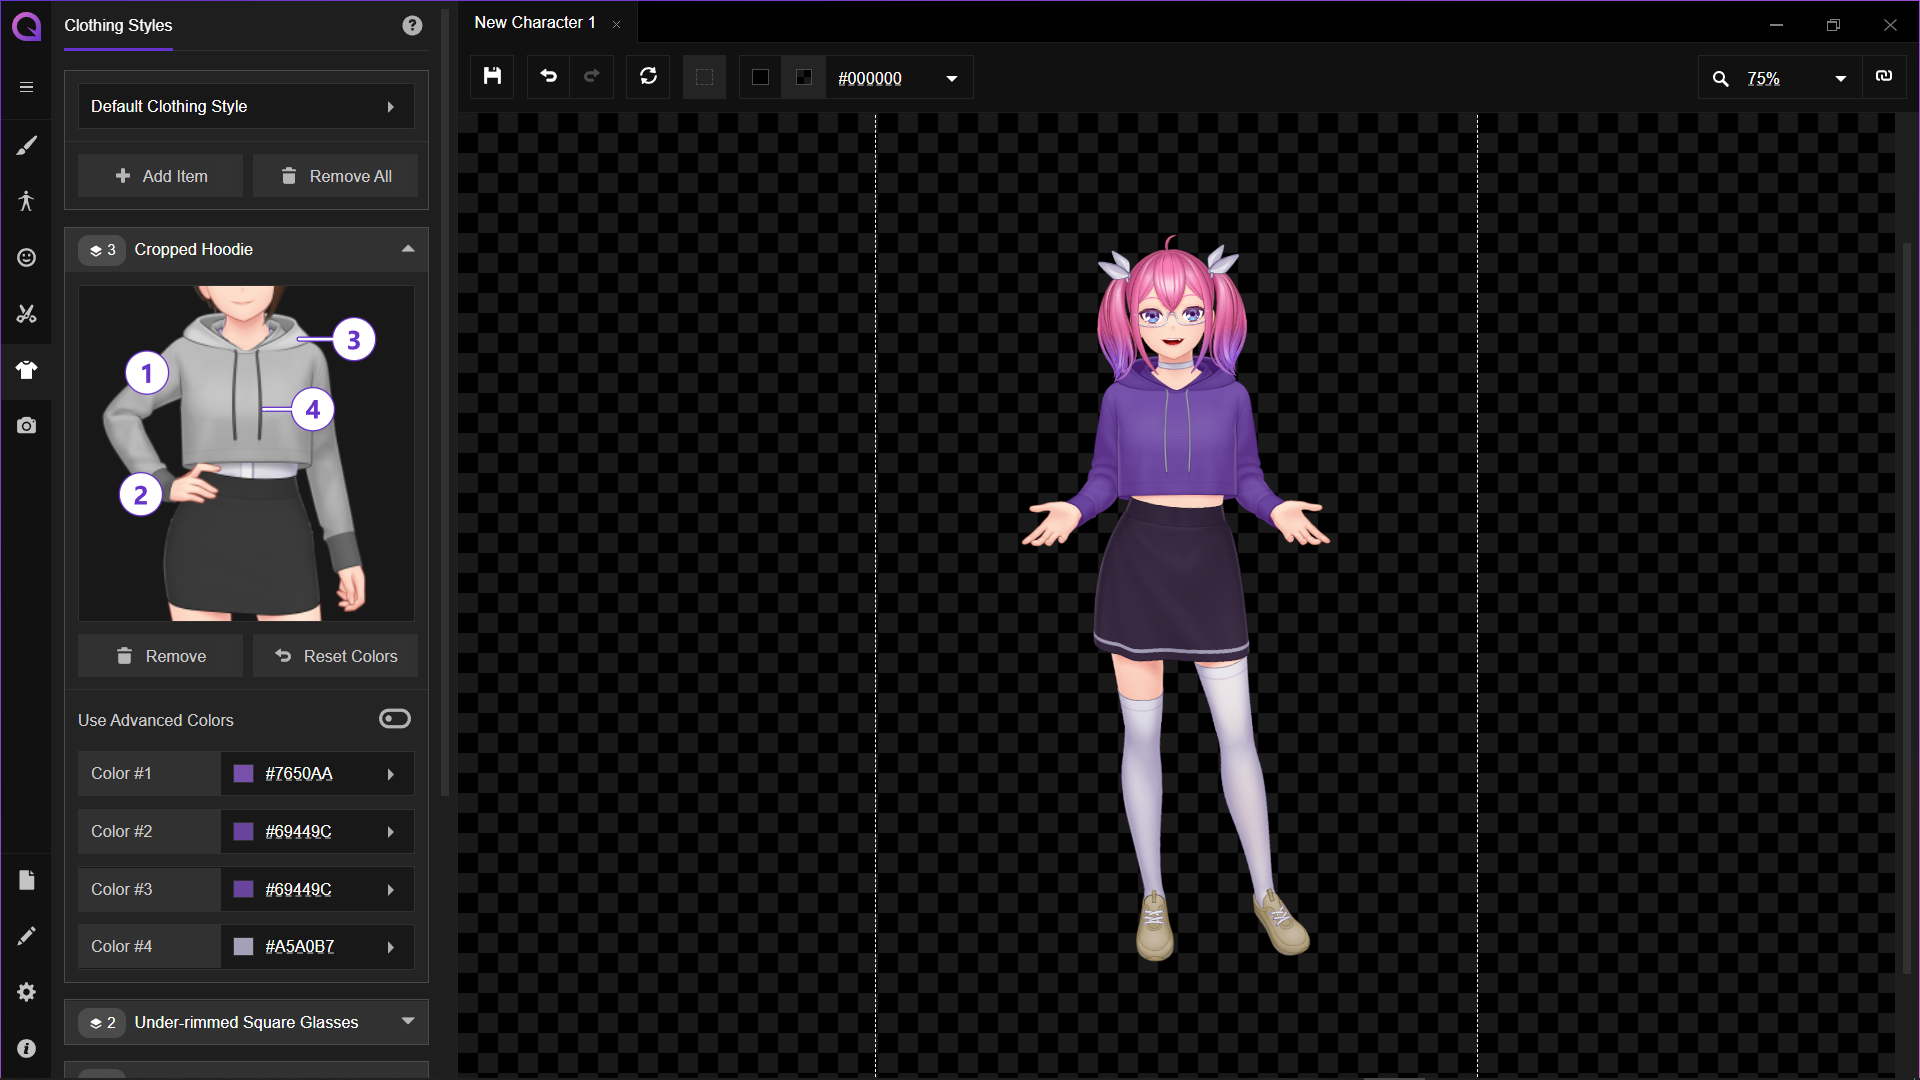 Mannequin: 2D Anime Character Avatar Generator For Illustrations, VTuber,  Animation, and Game Development Projects